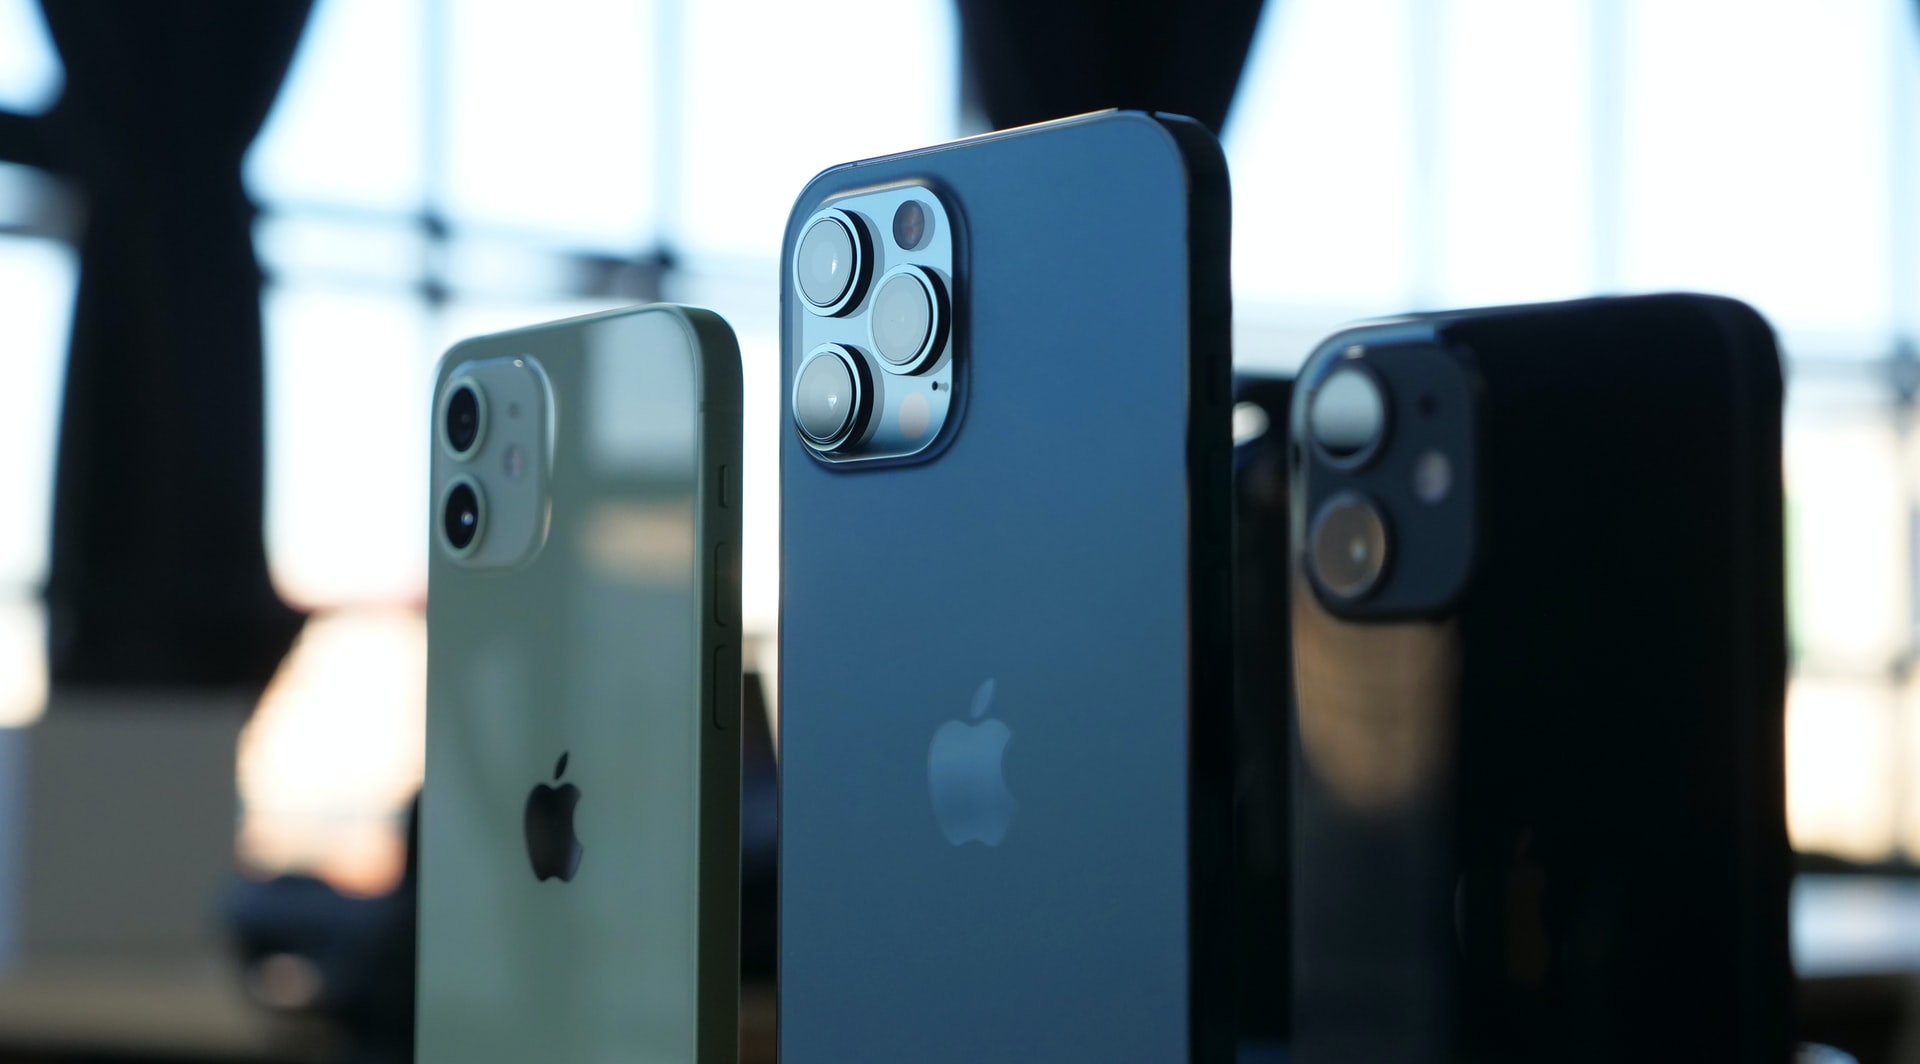 Things You Need To Know Before Buying The Apple iPhone 11 or the iPhone 12